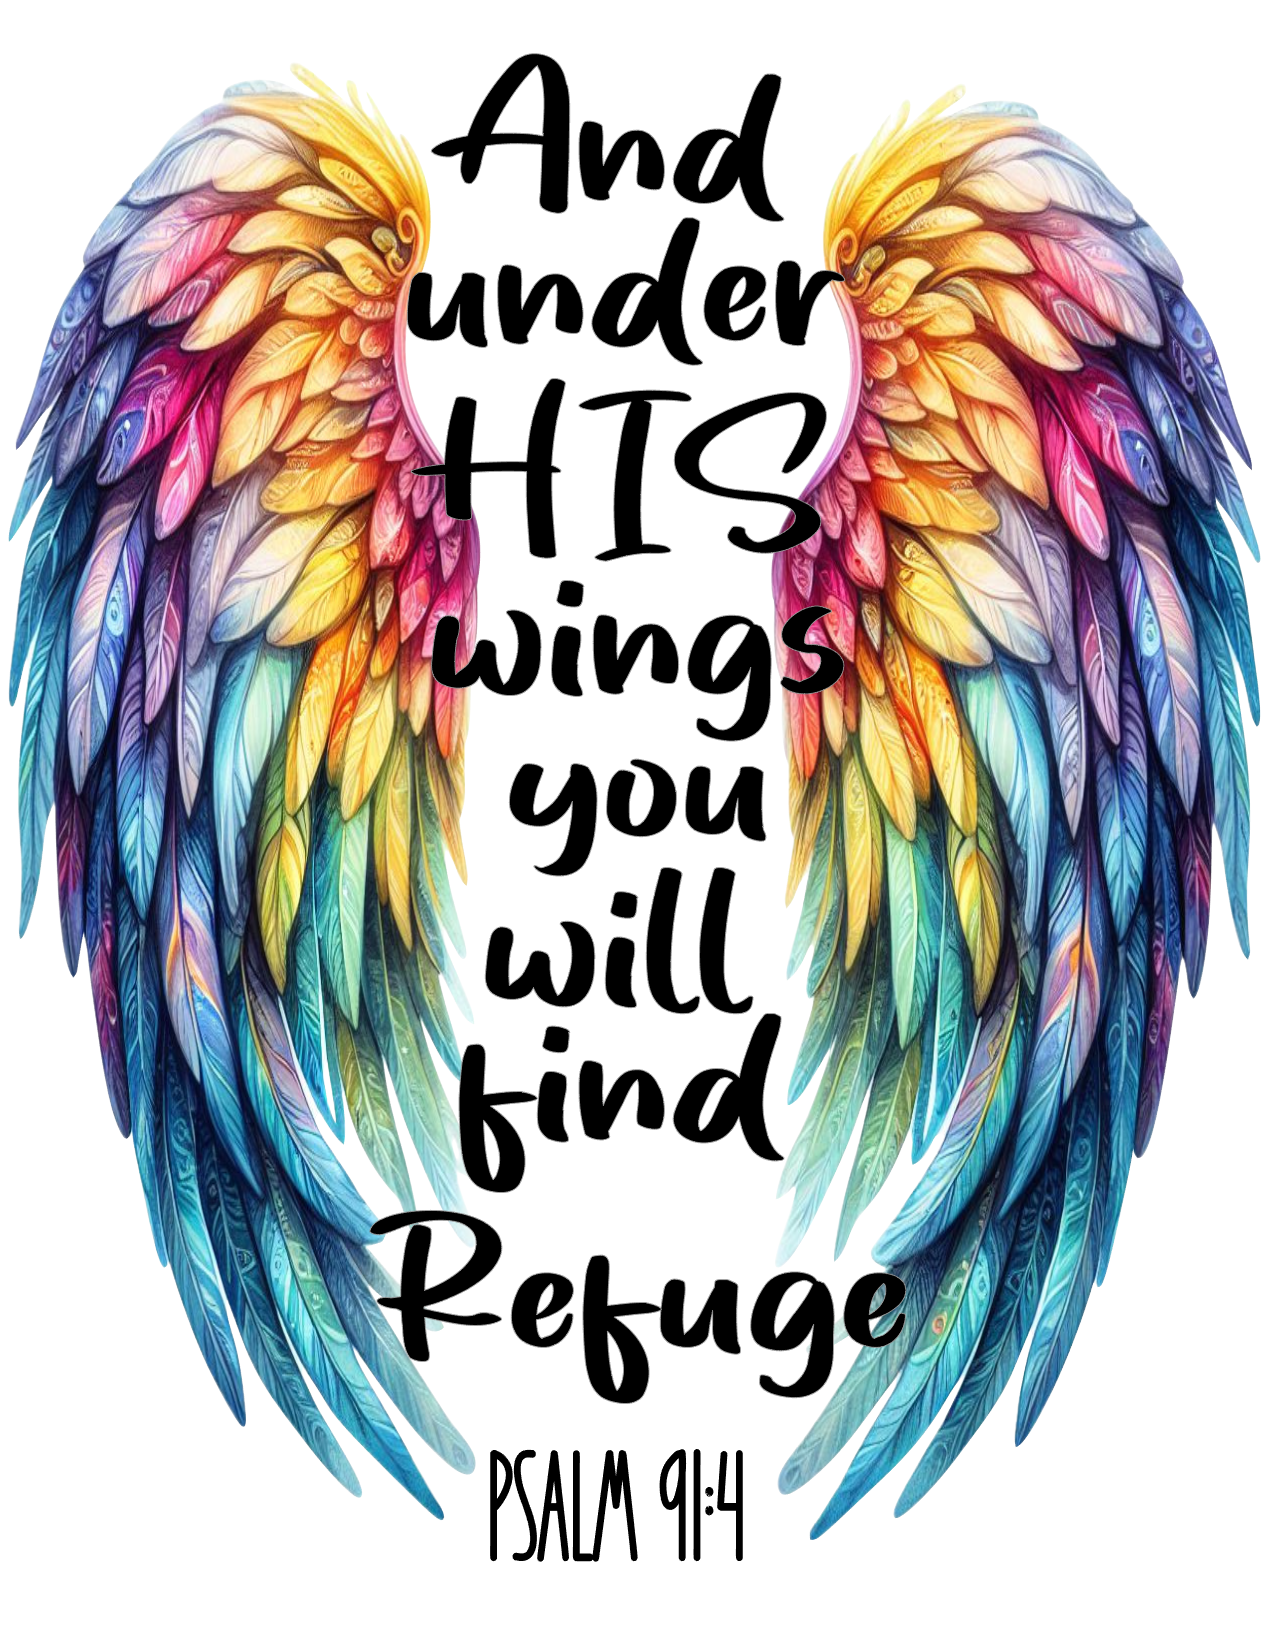 #290 And under HIS wings you will find Refuge Psalm 91:4